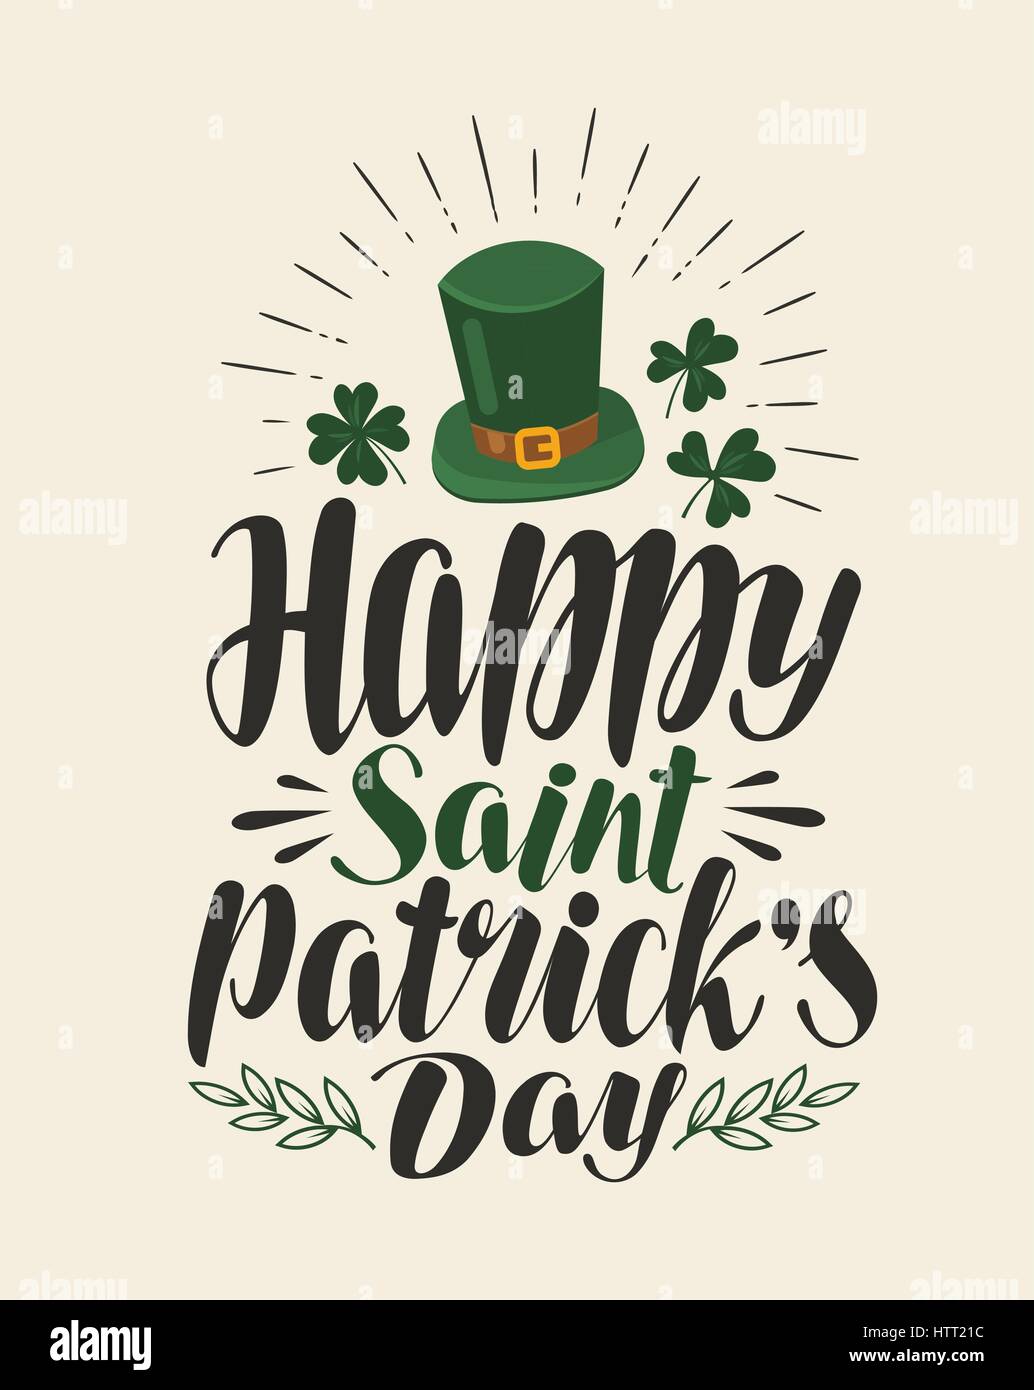 Happy st. Patrick's Day, vintage greeting card. Holiday, irish beer festival banner. Lettering, calligraphy vector illustration Stock Vector